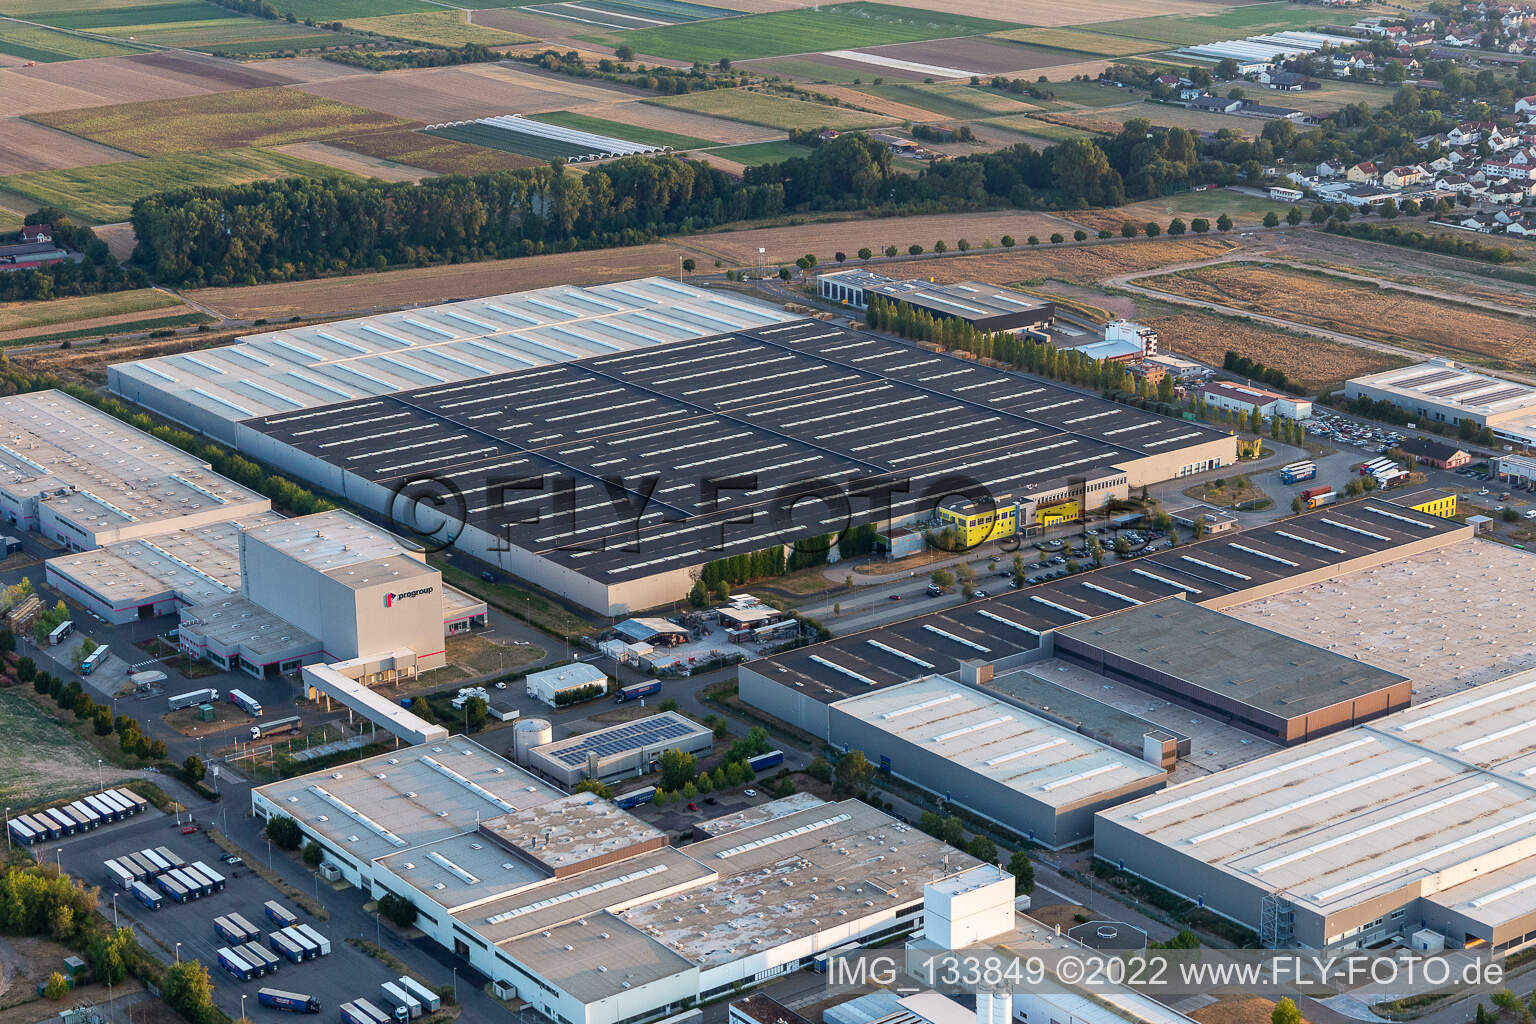 Aerial view of Mercedes-Benz logistics center in Interpark in Offenbach an der Queich in the state Rhineland-Palatinate, Germany